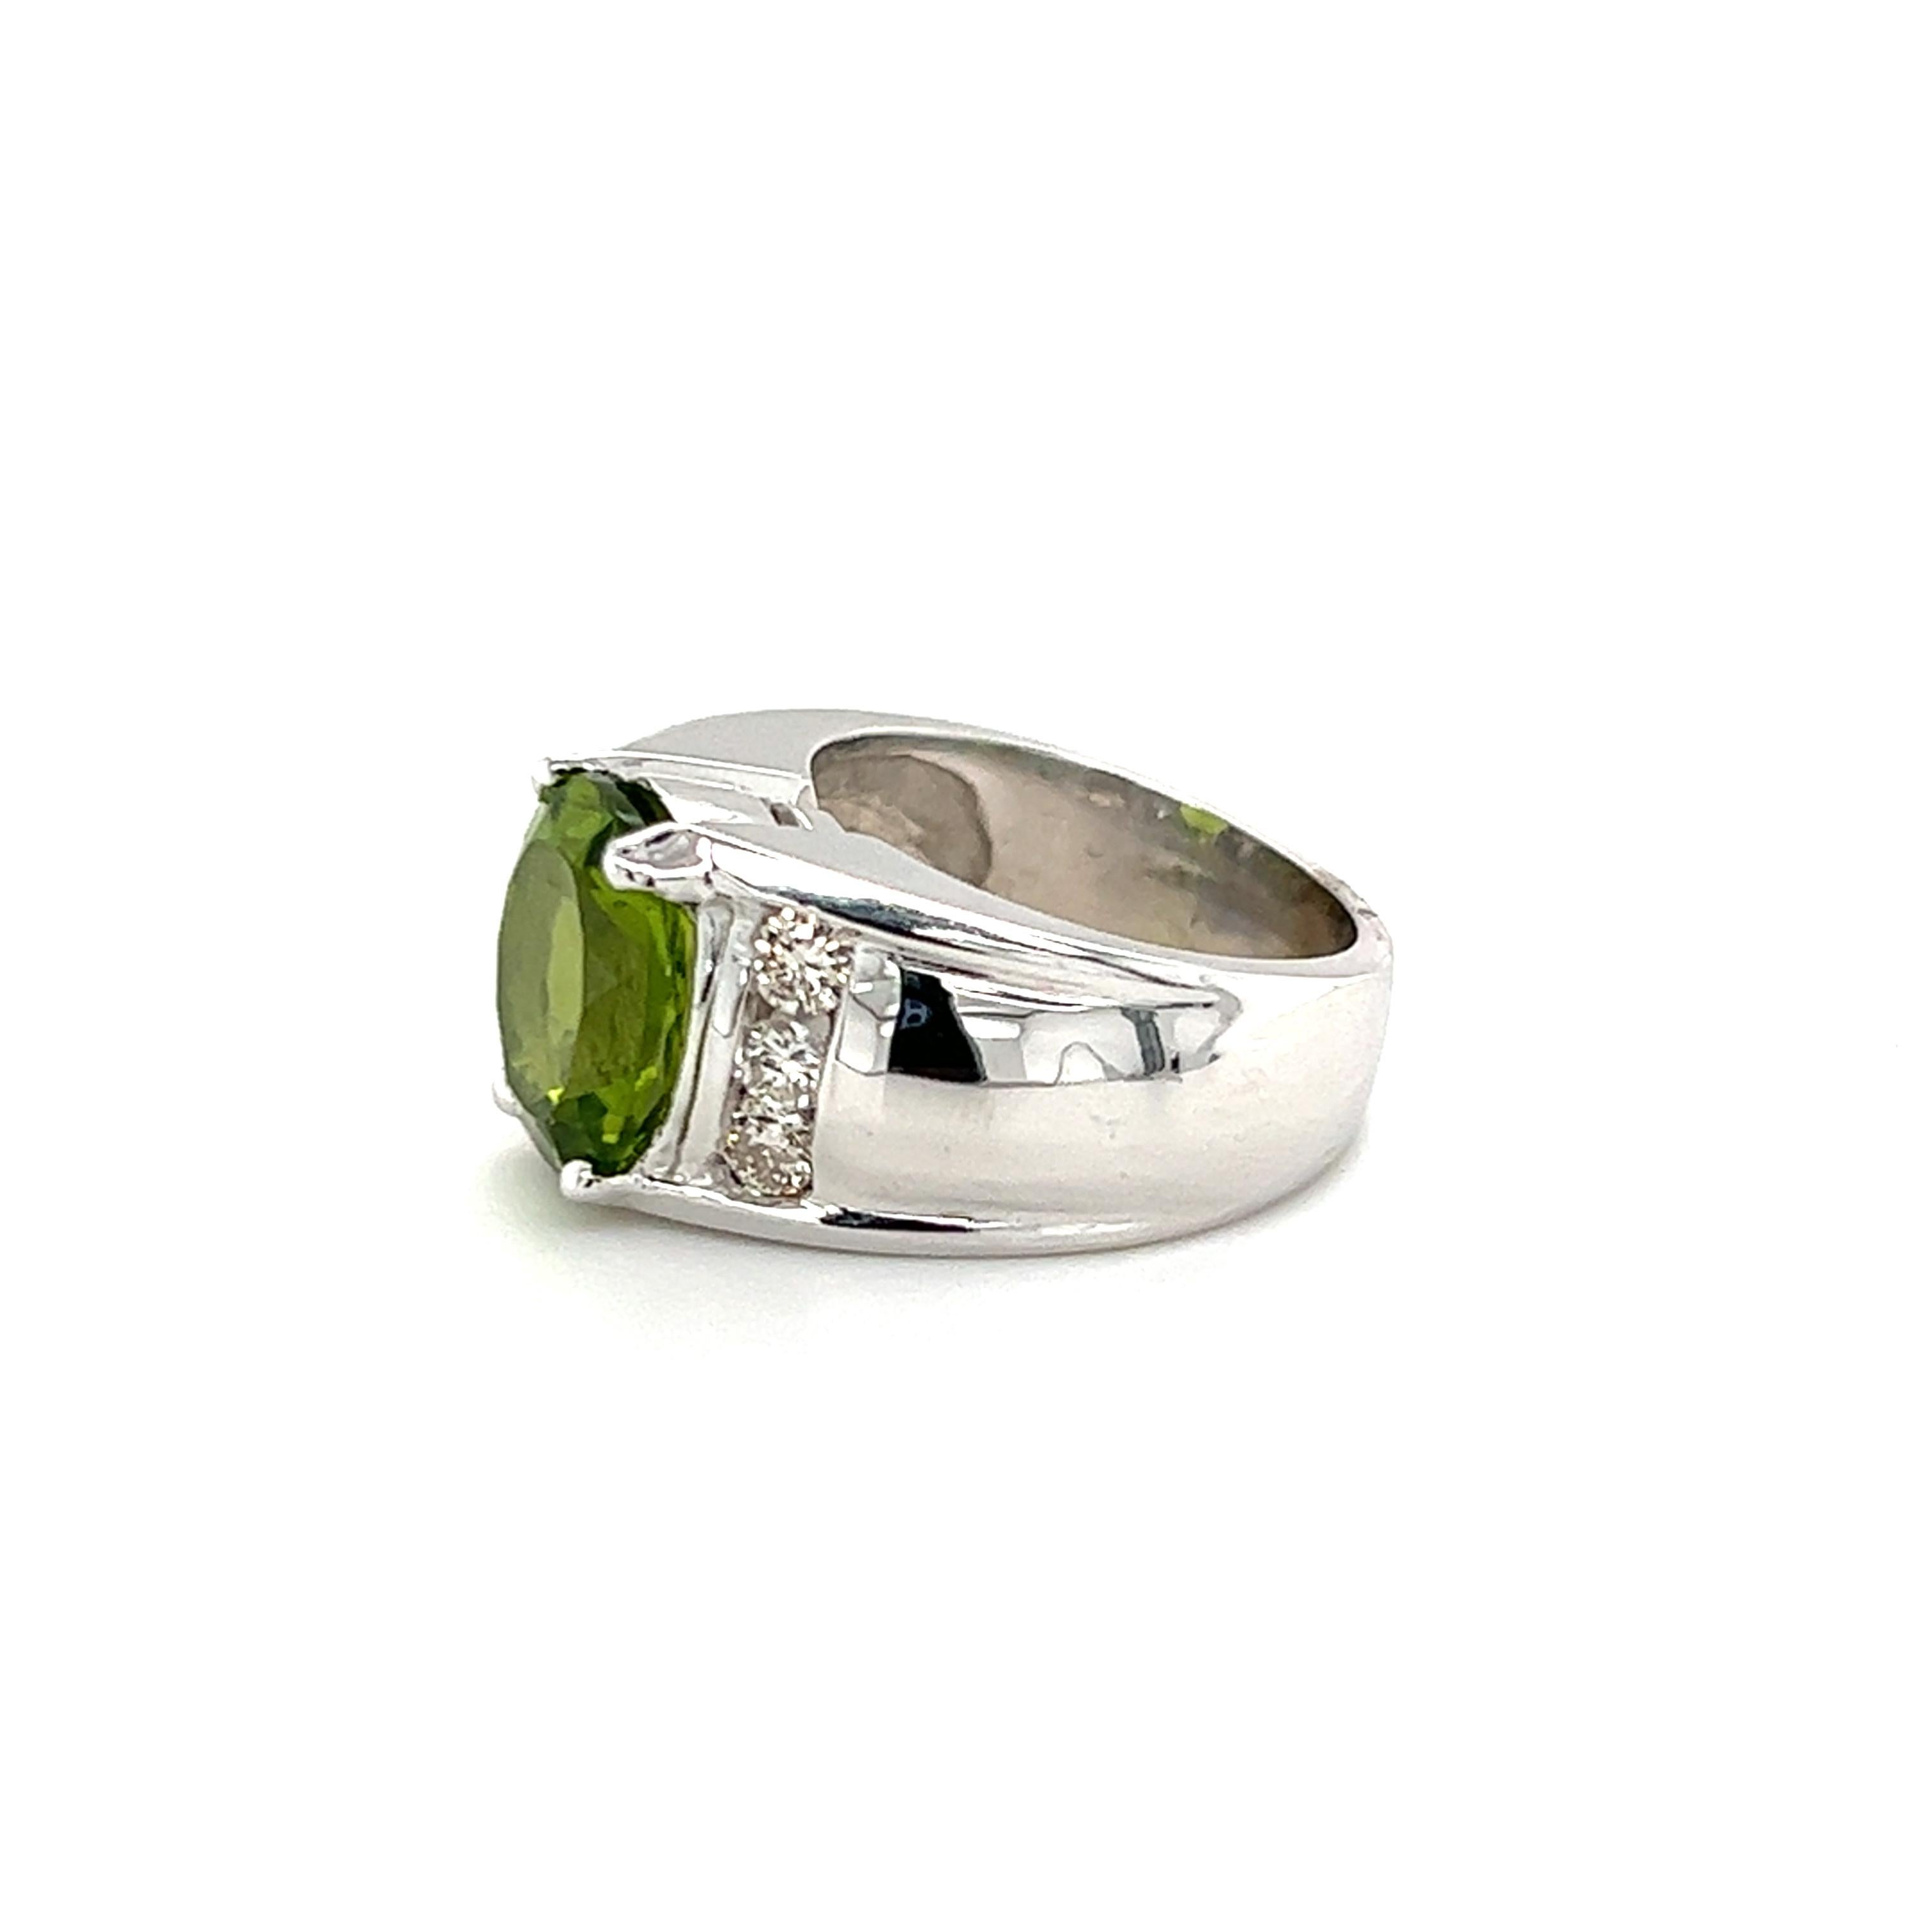 One 14-karat white gold ring set with one center oval peridot stone, approximately 4.90 carat total.  The center stone is flanked by six (6) channel set round brilliant cut diamonds, approximately 0.63-carat total weight with matching H/I color and